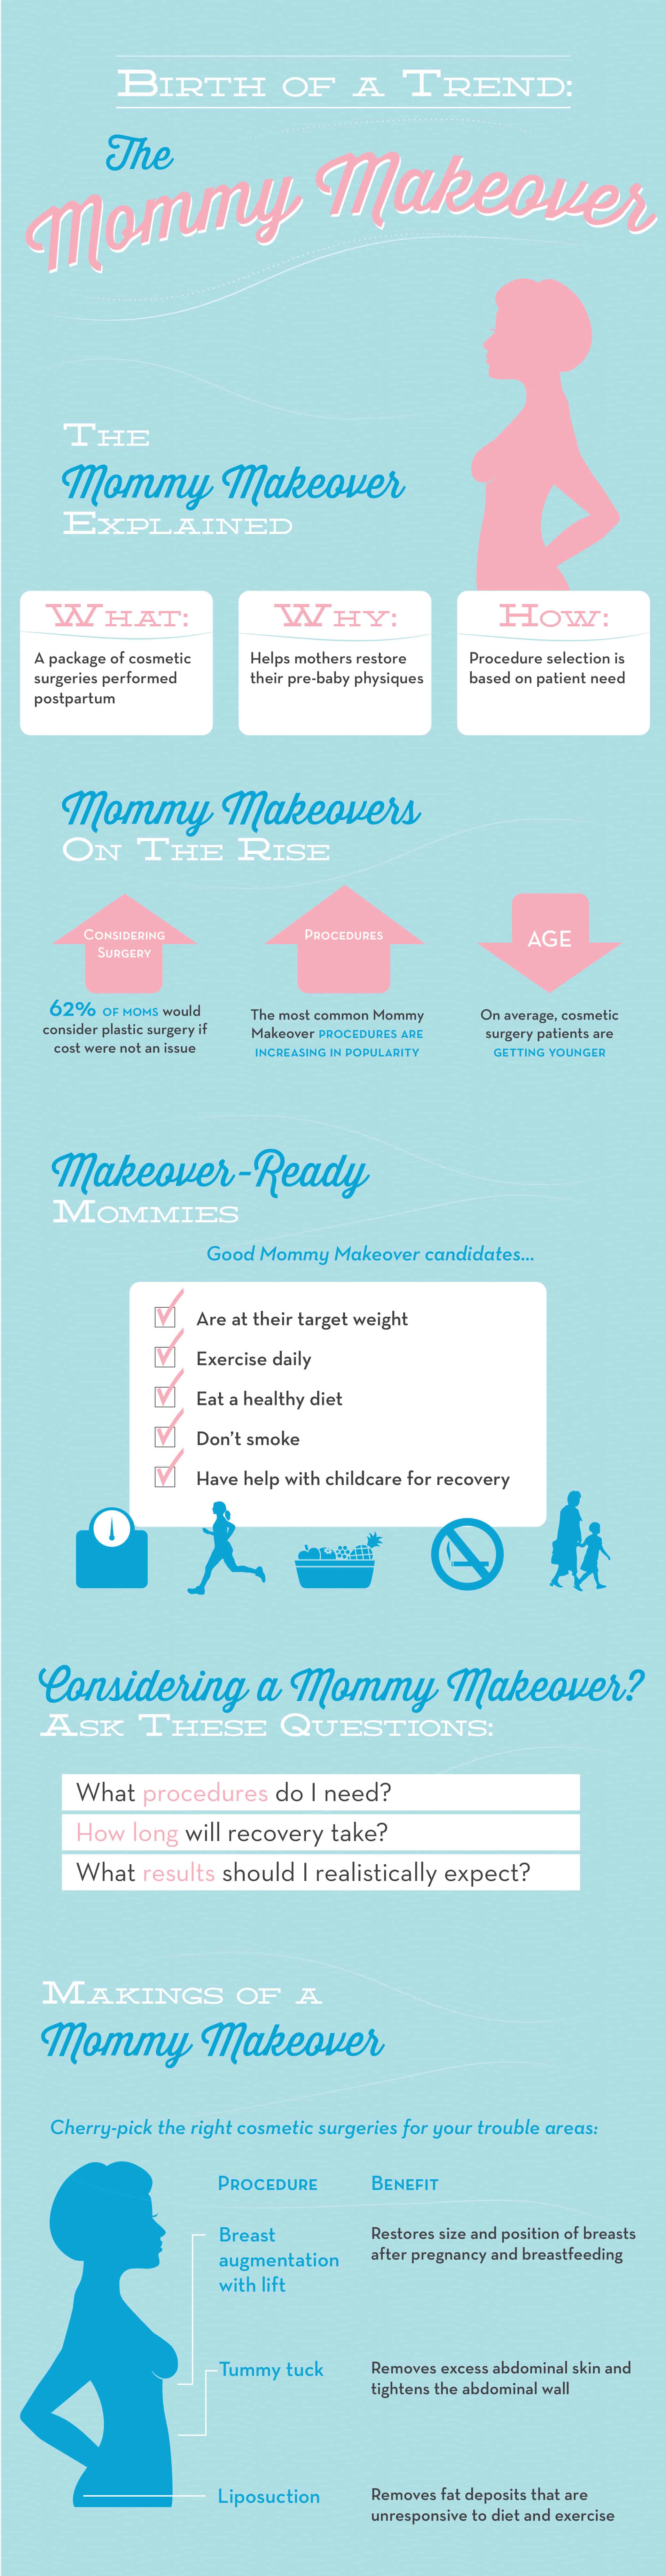 Mommy Makeover Graphic - What is a Mommy Makeover?